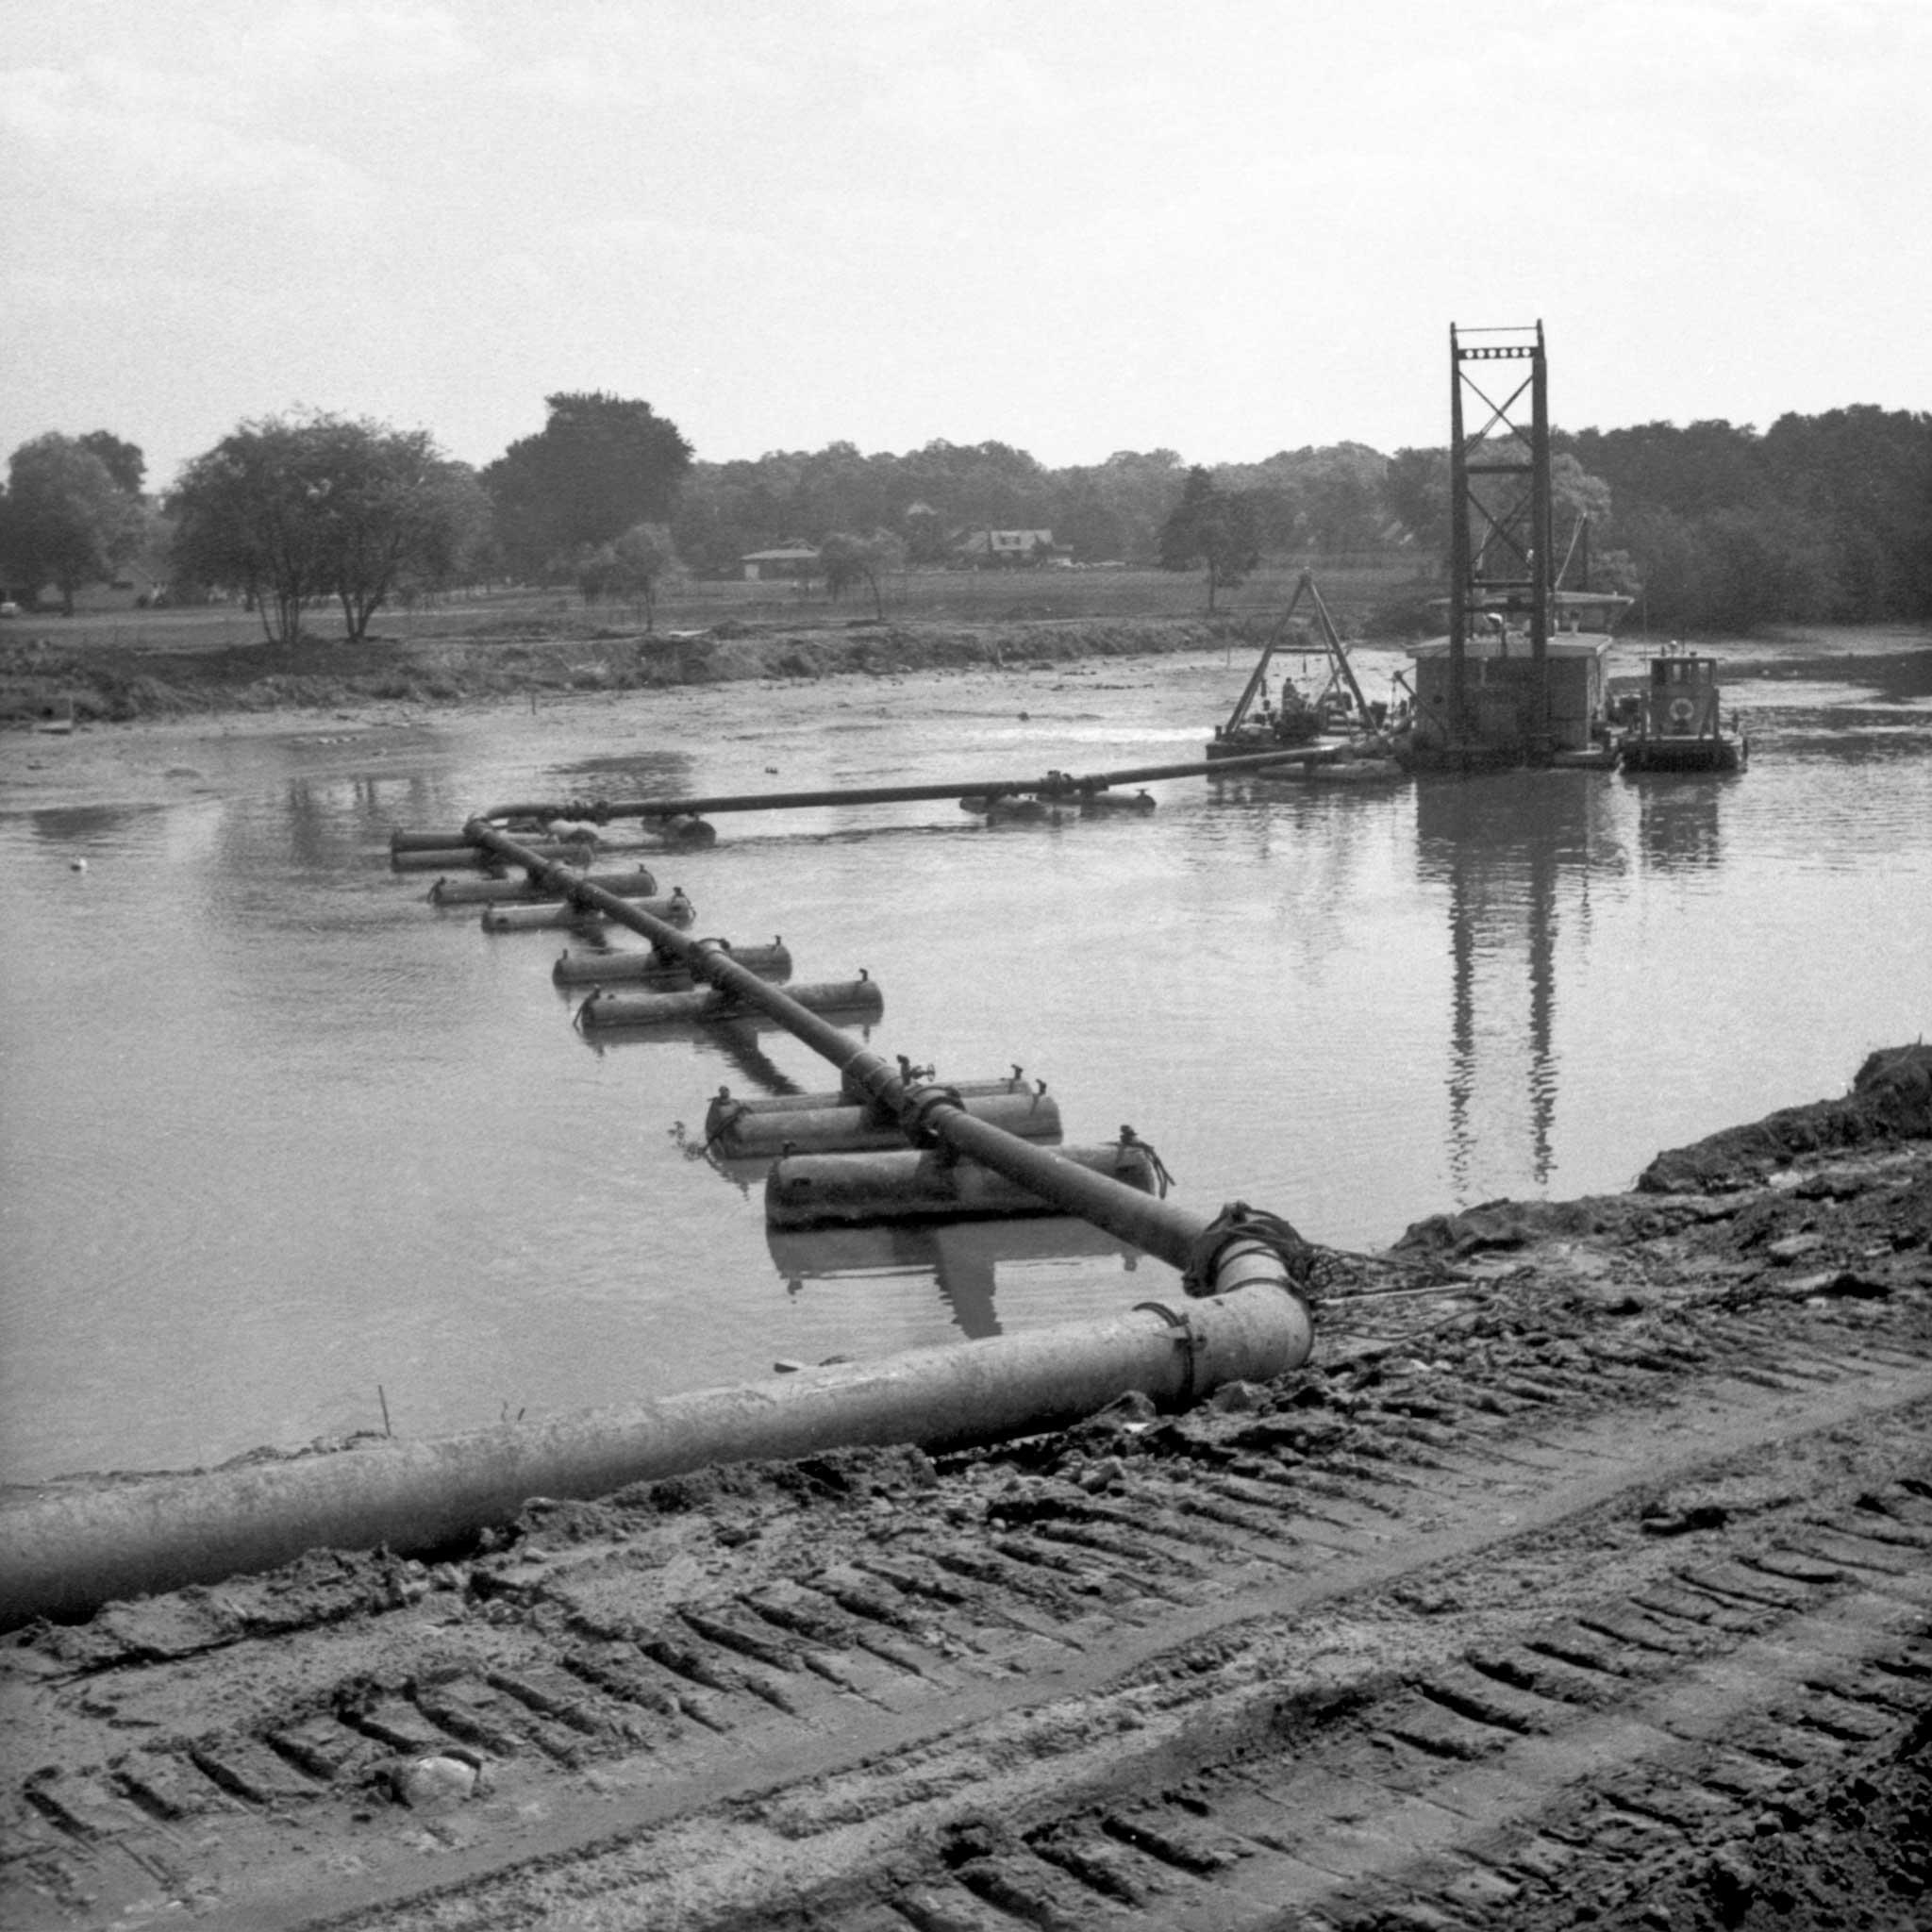 black and white image of pontoons and a pumping derrick in a body of water with trees in the background and railroad in the foreground